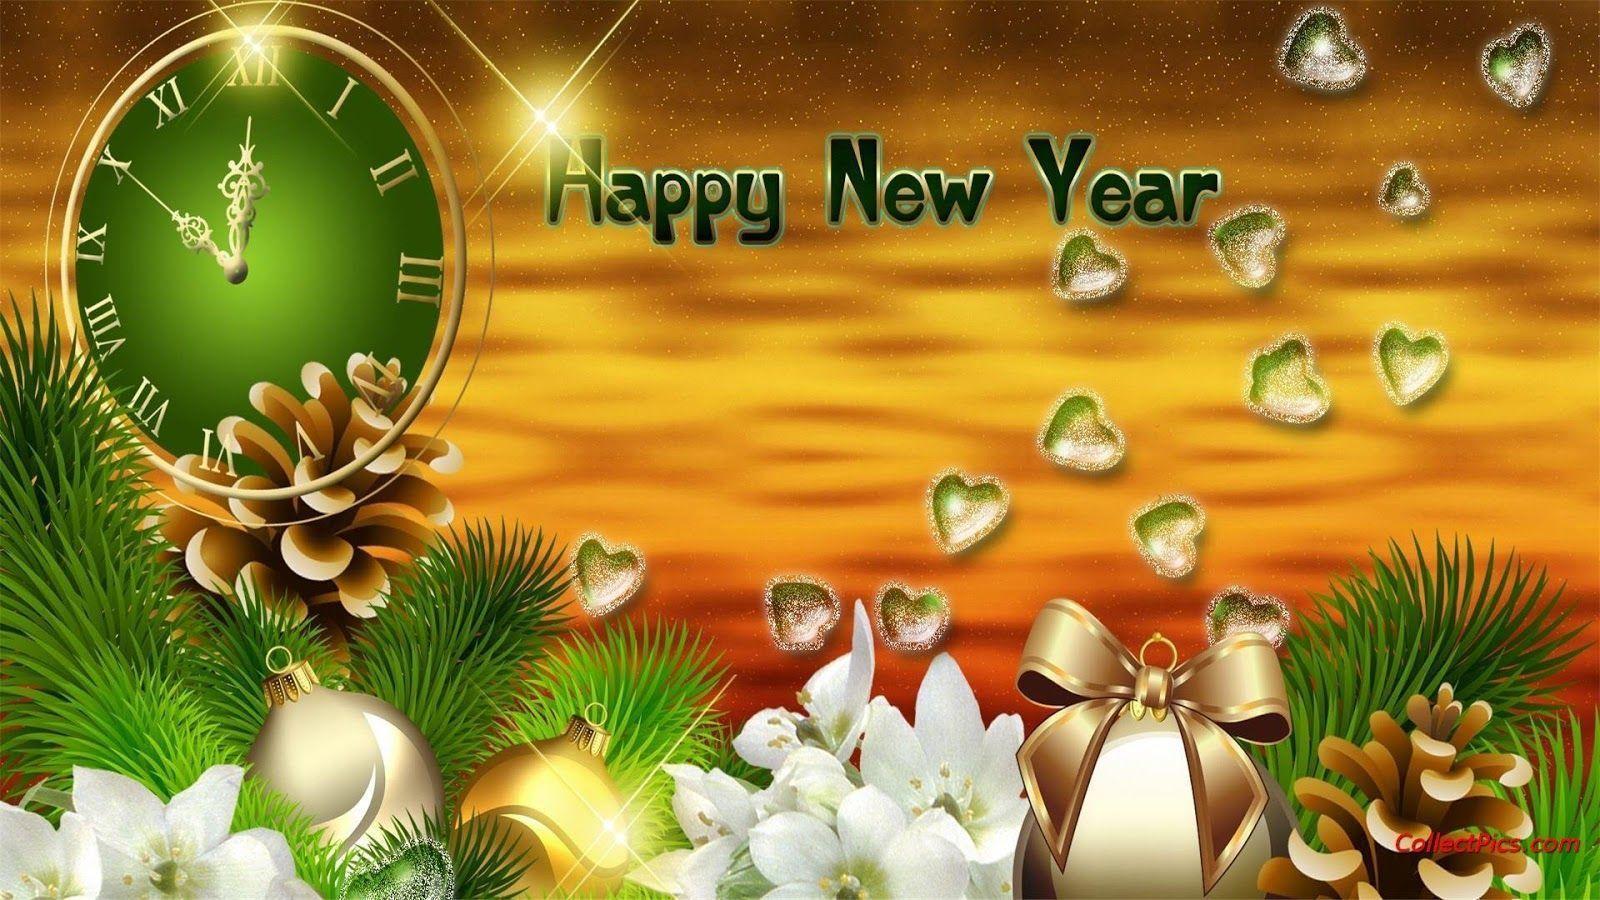 Happy New Year 2017 Image, Wallpaper, Picture, Photo in HD Free